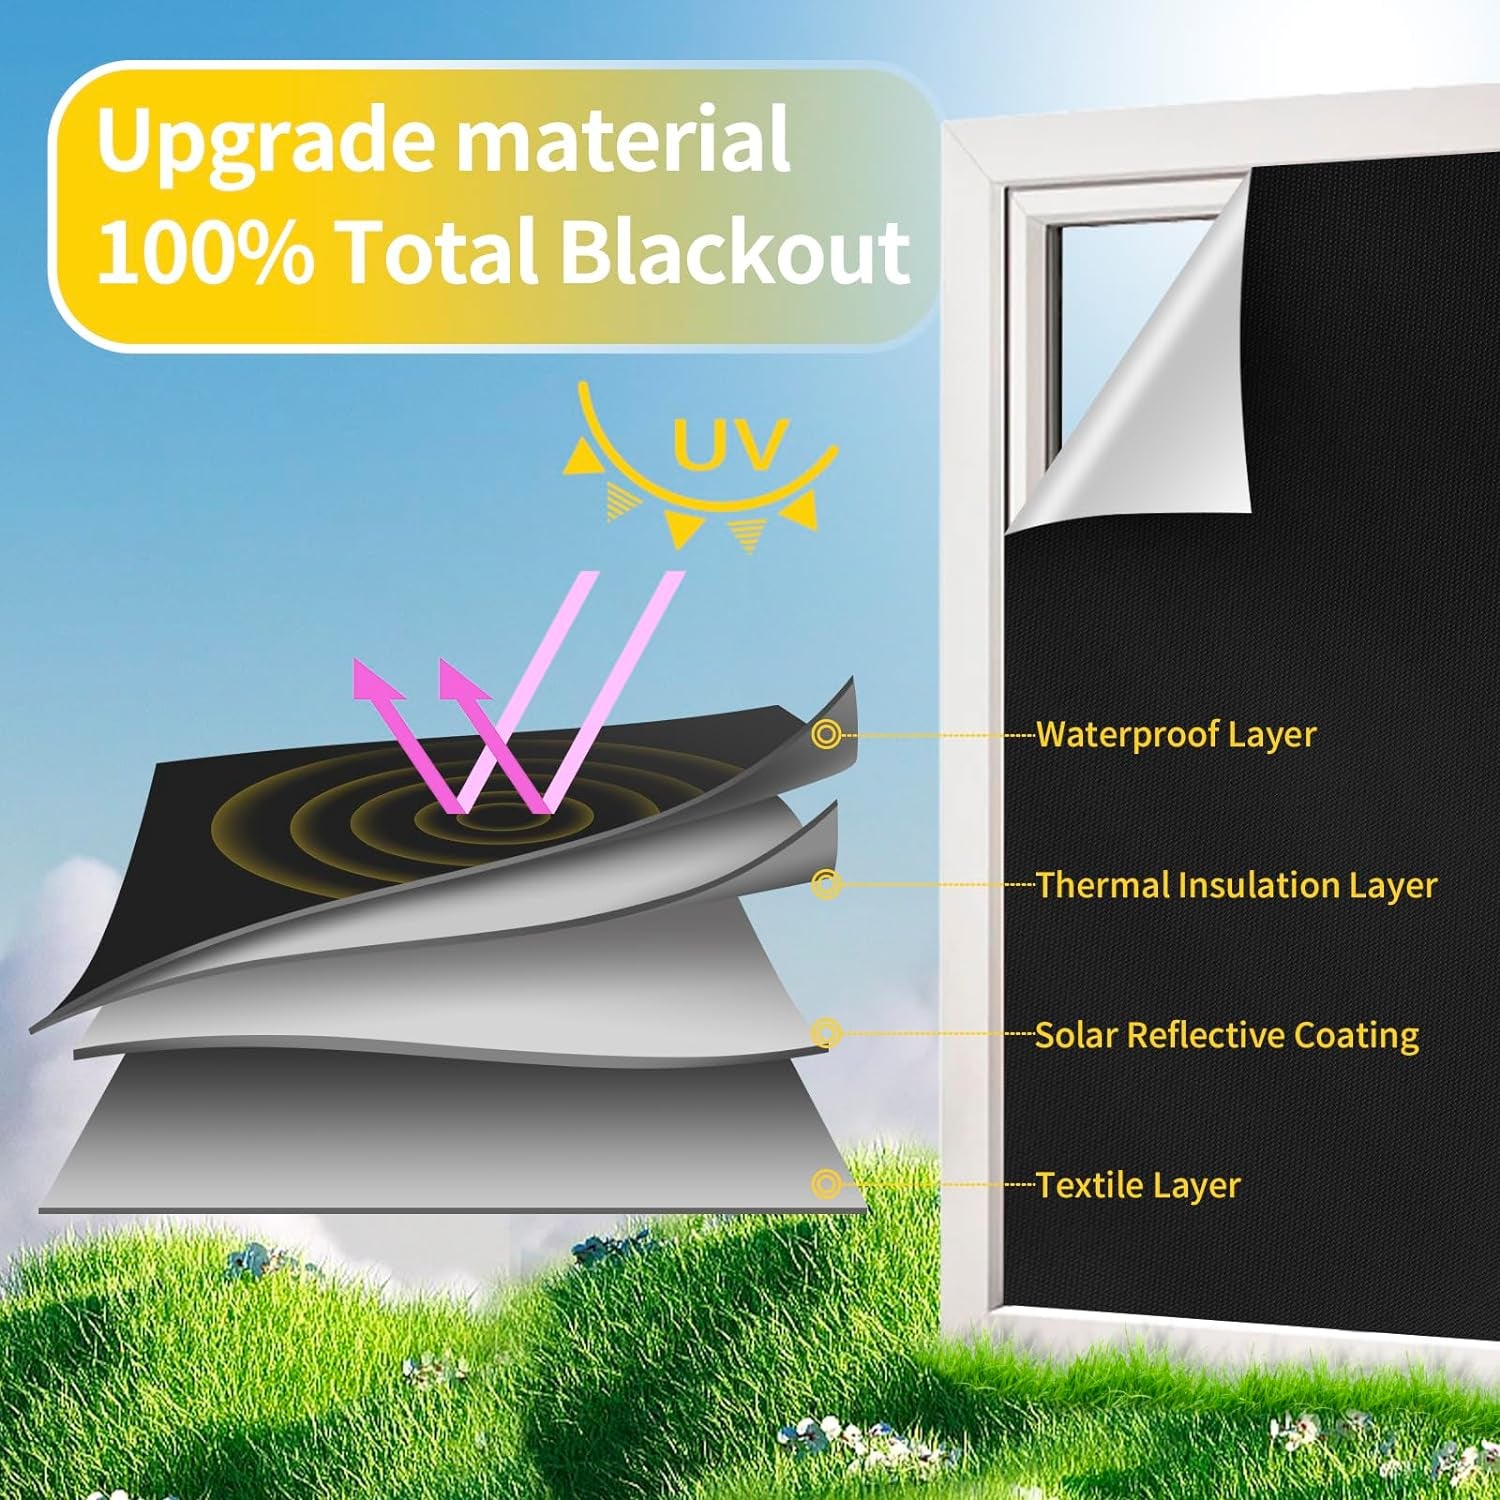 Portable Blackout Curtains, 57"X 39" Blackout Shades for Windows 100% Black Out Temporary Blackout Blinds for Bedroom Baby Nursery Window Travel Dorm Room  YOOMINI   